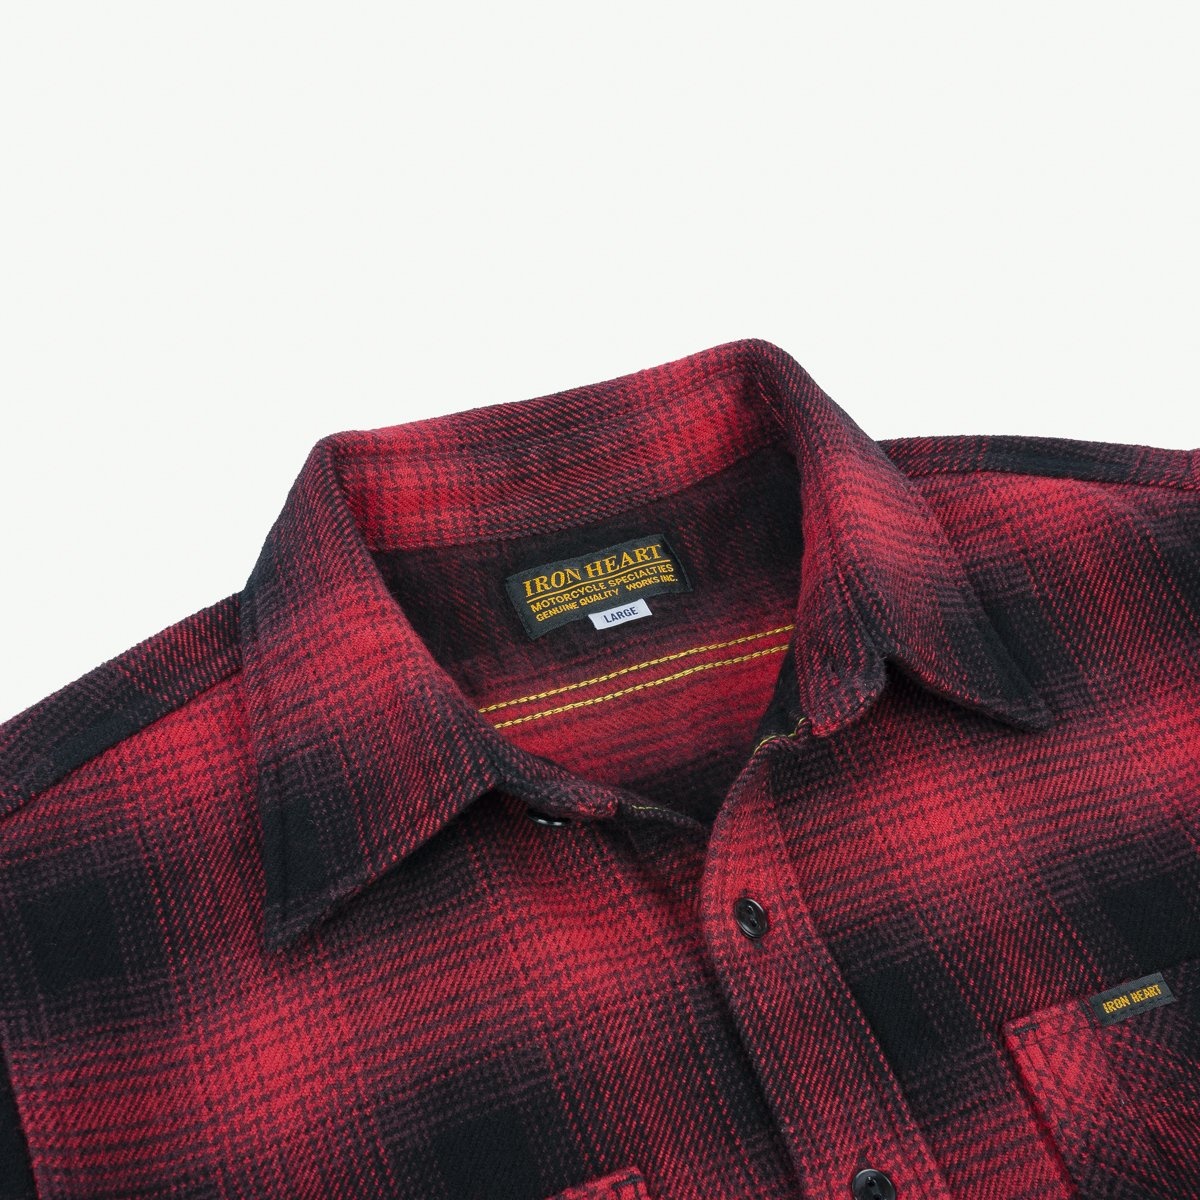 IHSH-265-RED Ultra Heavy Flannel Ombré Check Work Shirt - Red/Black - 8